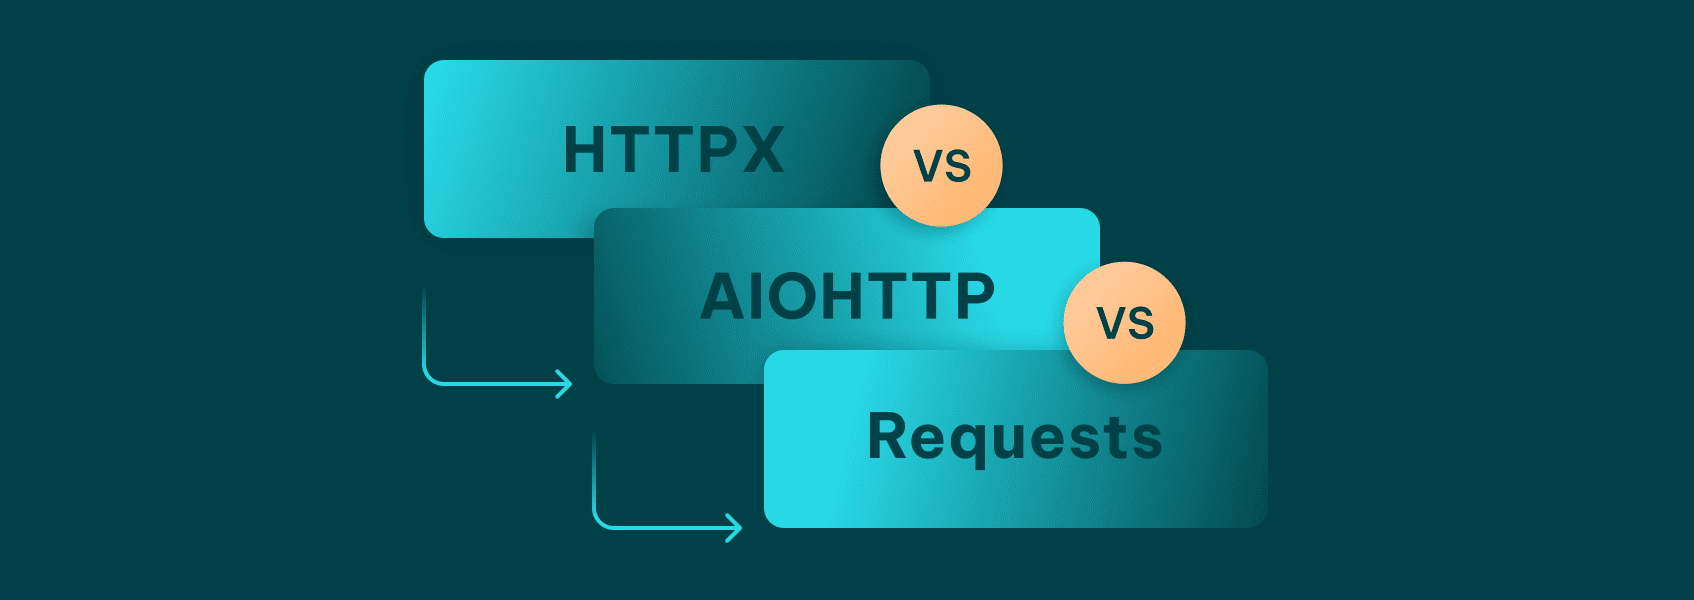 HTTPX vs AIOHTTP vs Requests: Which to Choose?